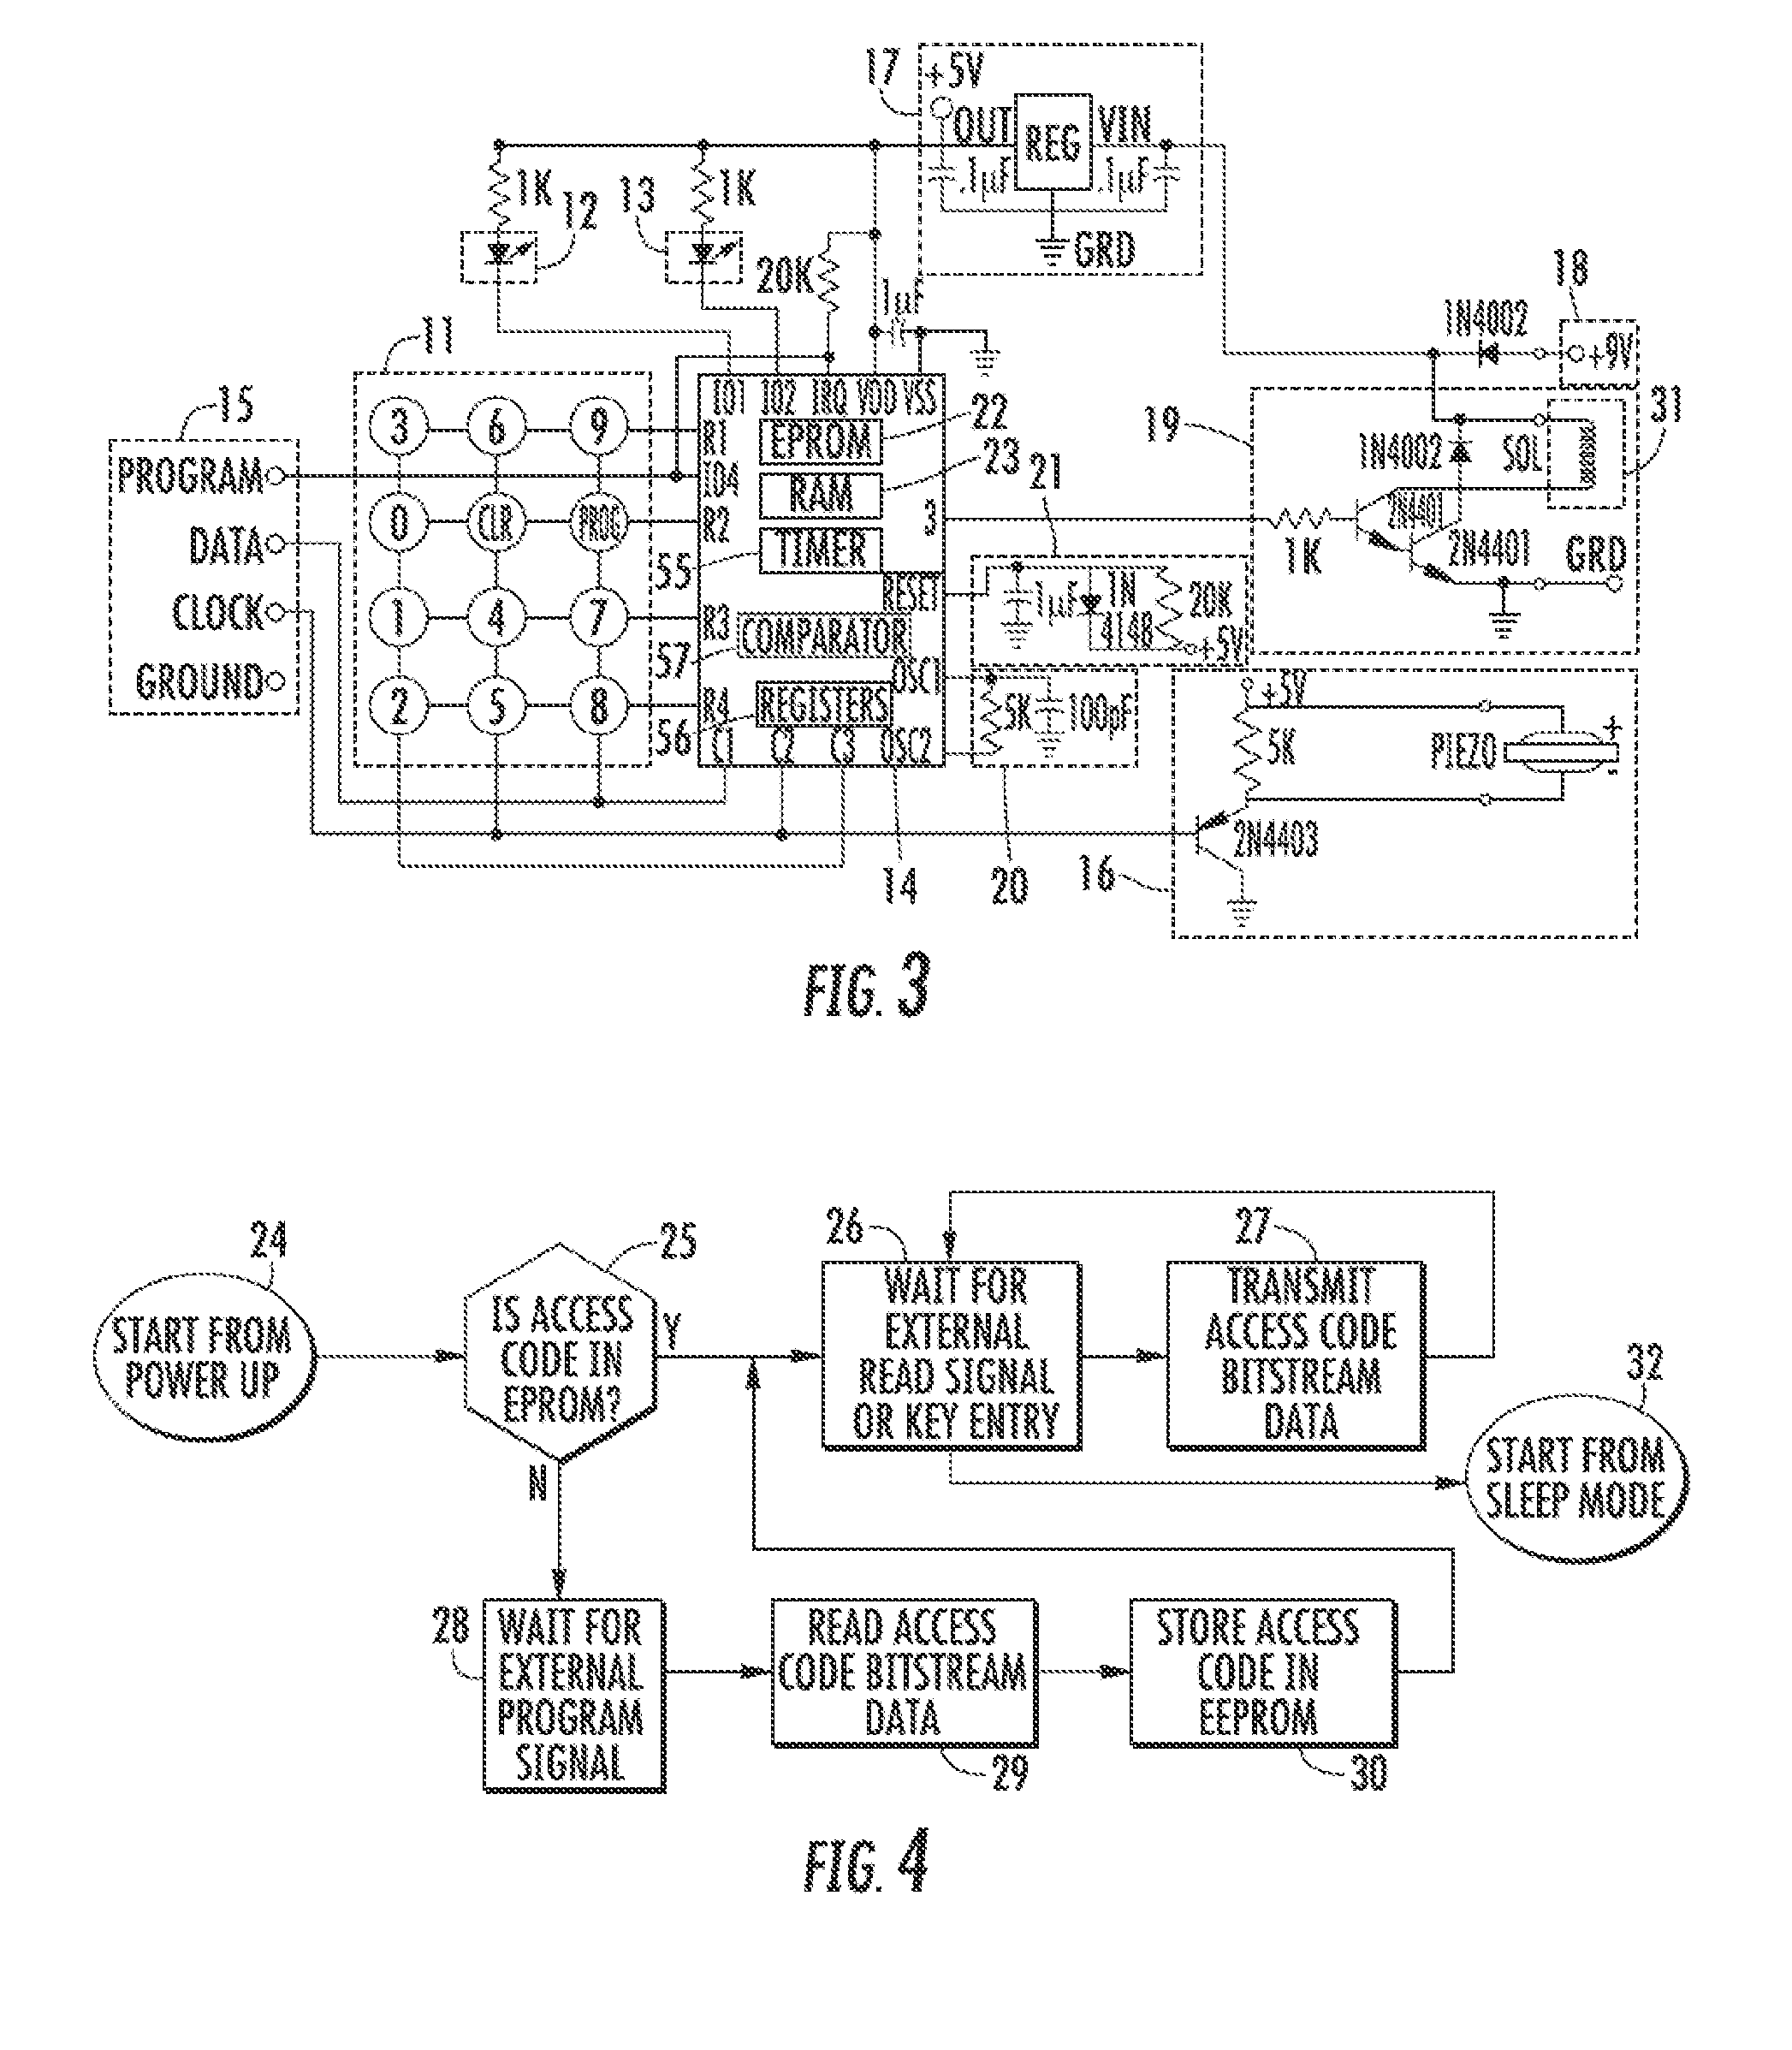 Method for Controlling and Recording the Security of an Enclosure